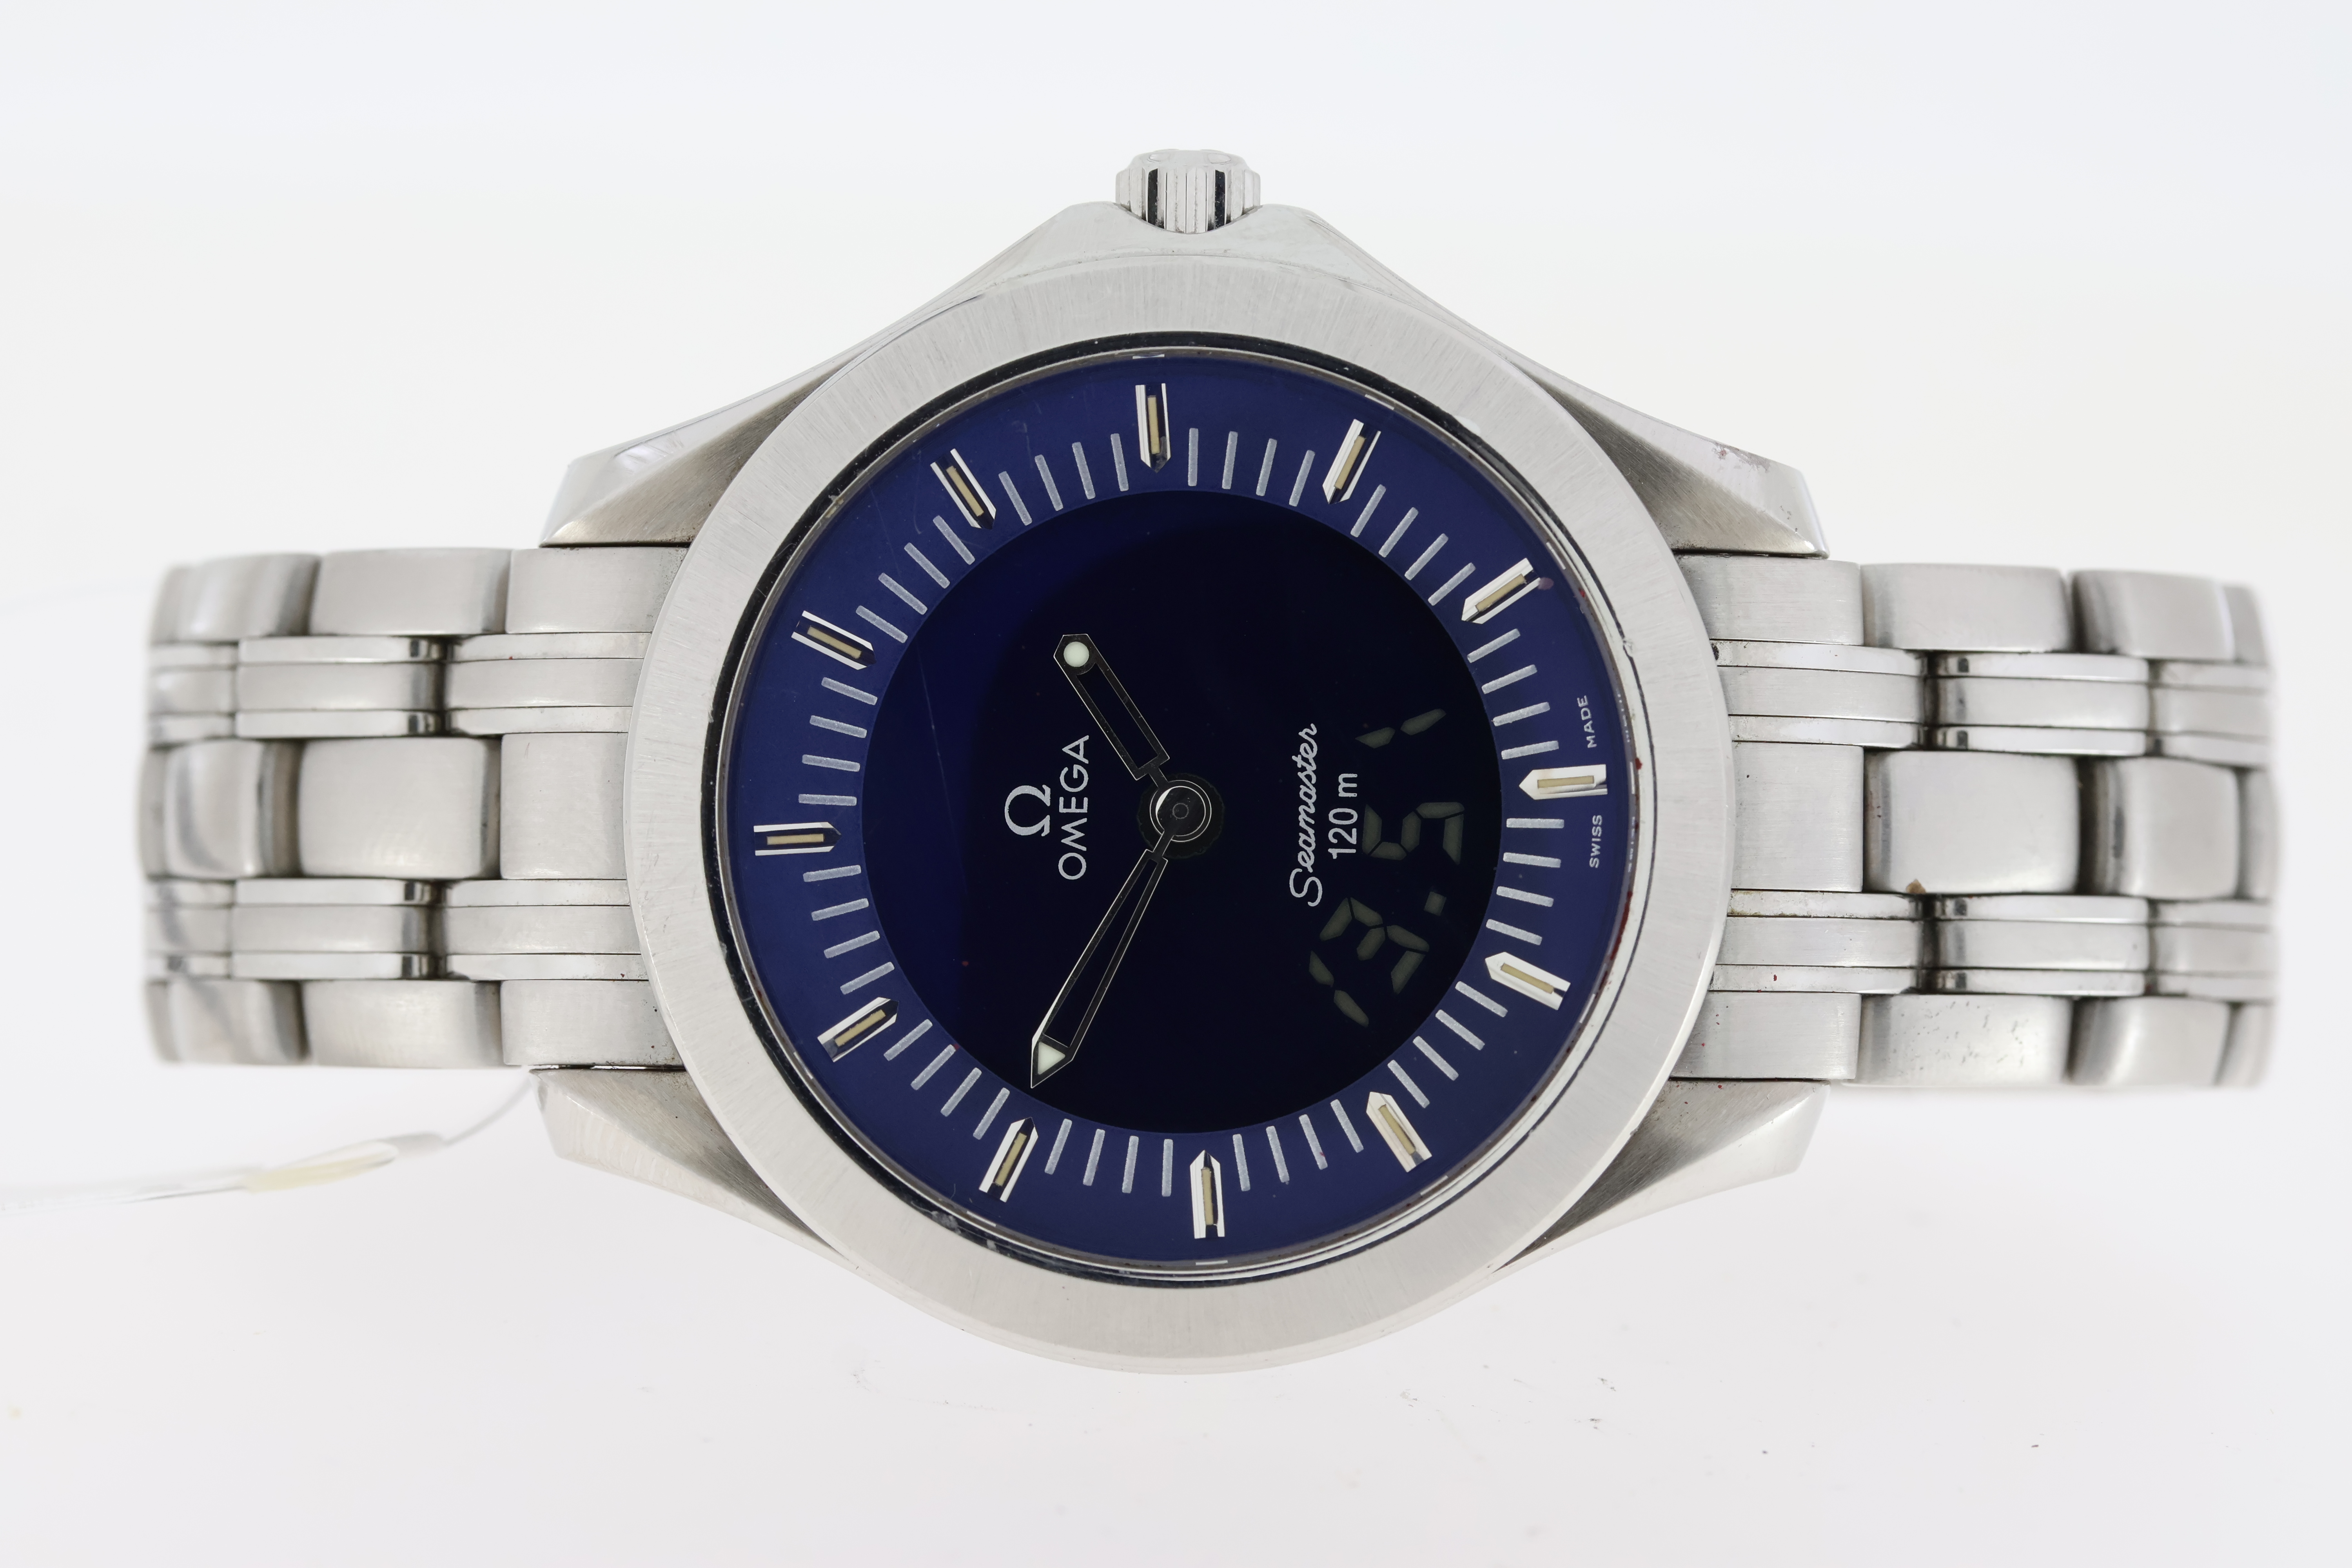 OMEGA SEAMASTER 120M MULTI FUNCTION REFERENCE 2521.81.00 BOX AND PAPERS 2000, circular blue dial - Image 2 of 5